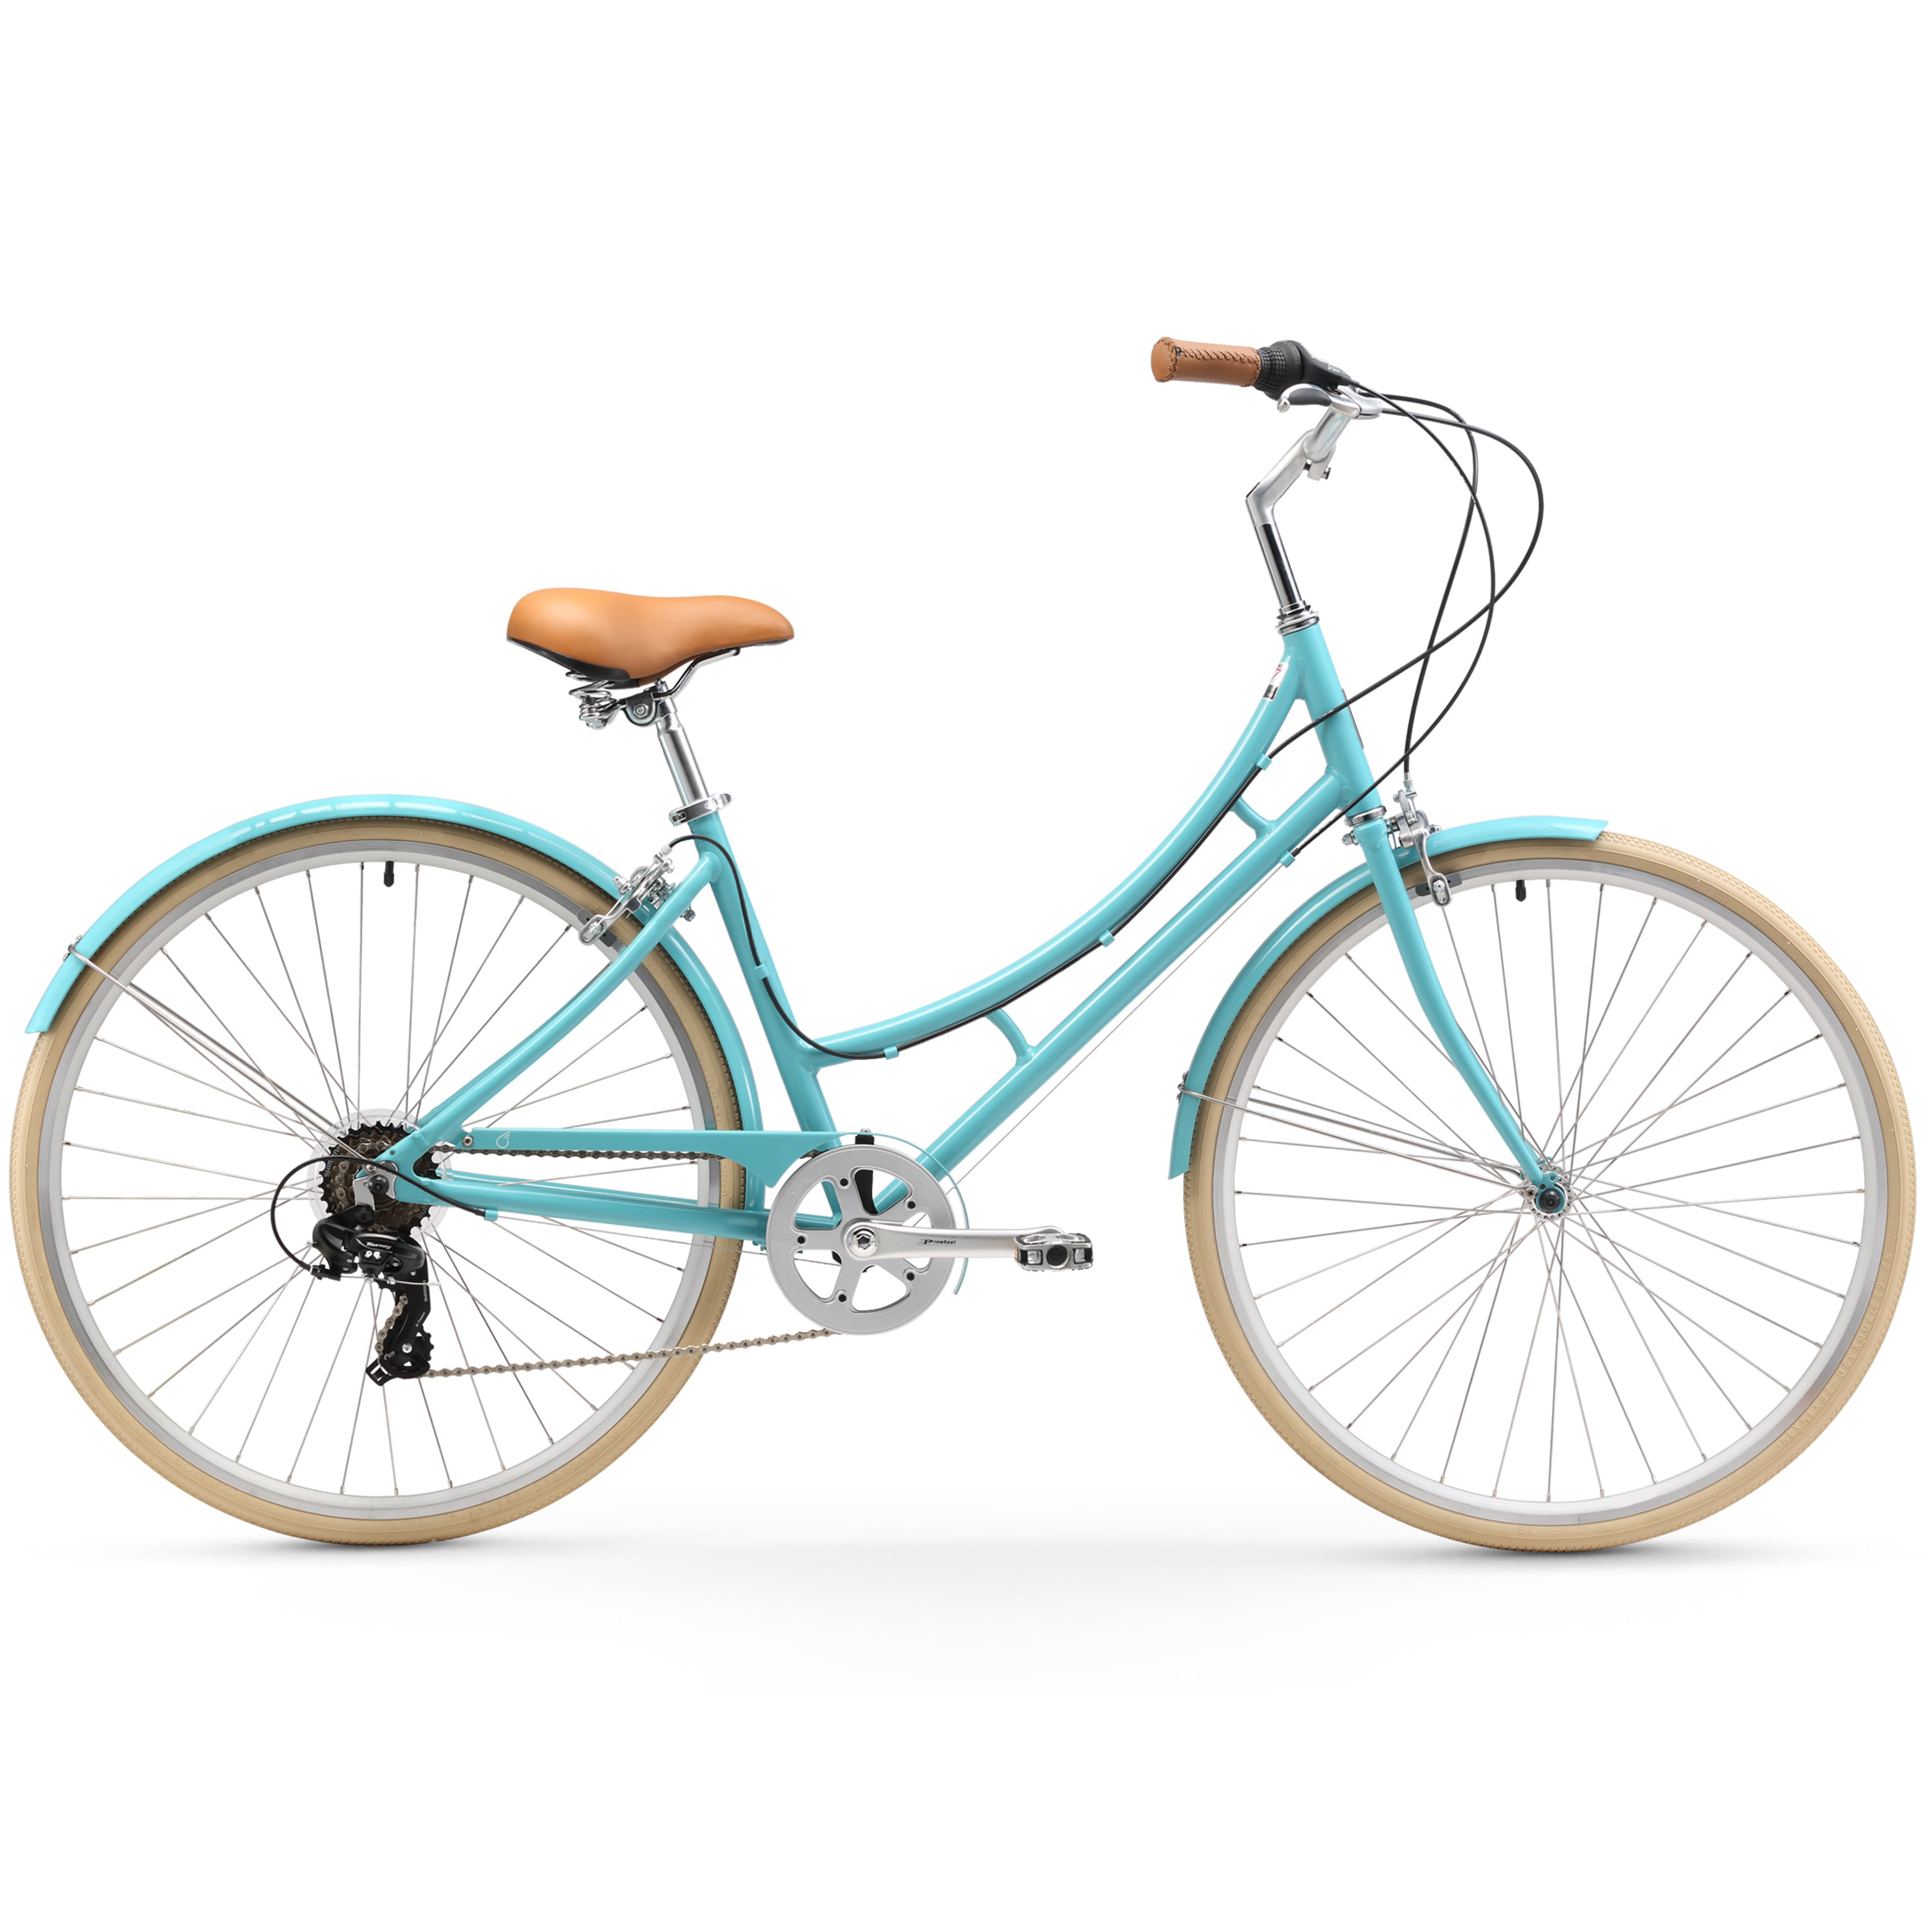 17/One Size sixthreezero 630056 Ride in the Park Womens 7-Speed City Bicycle 17 Frame/700C Wheels Blue 